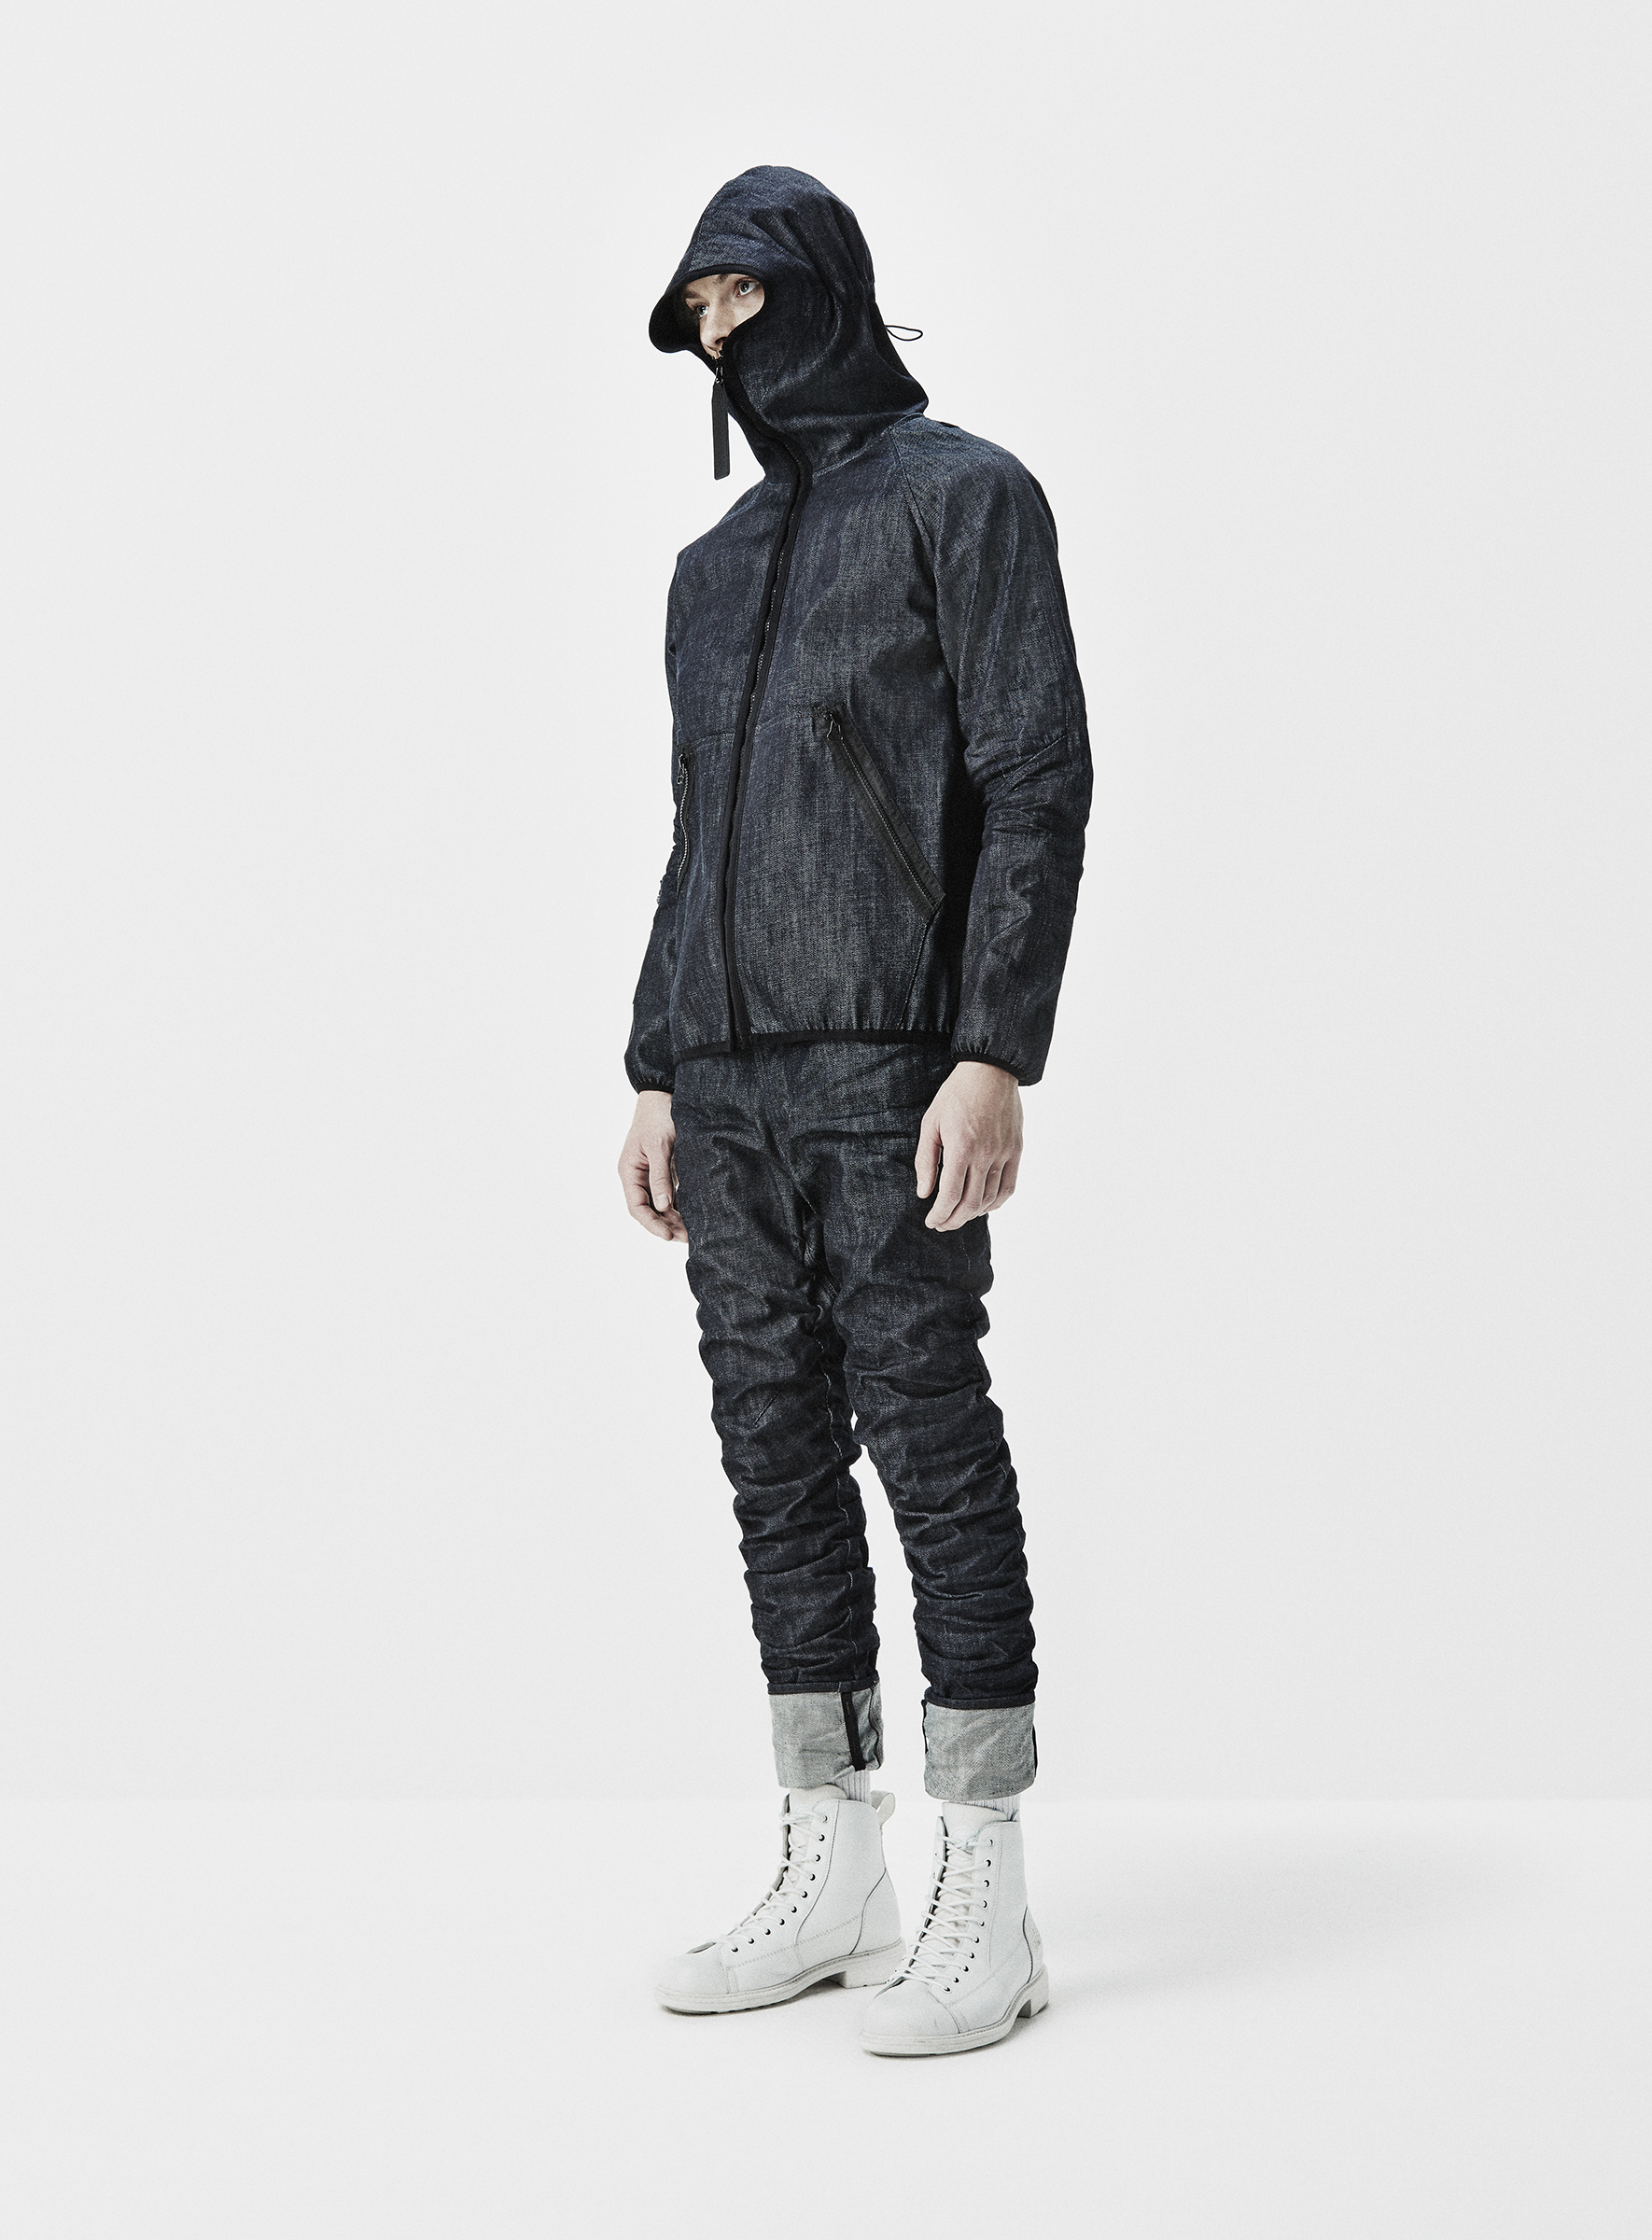 G Star Raw Research 6